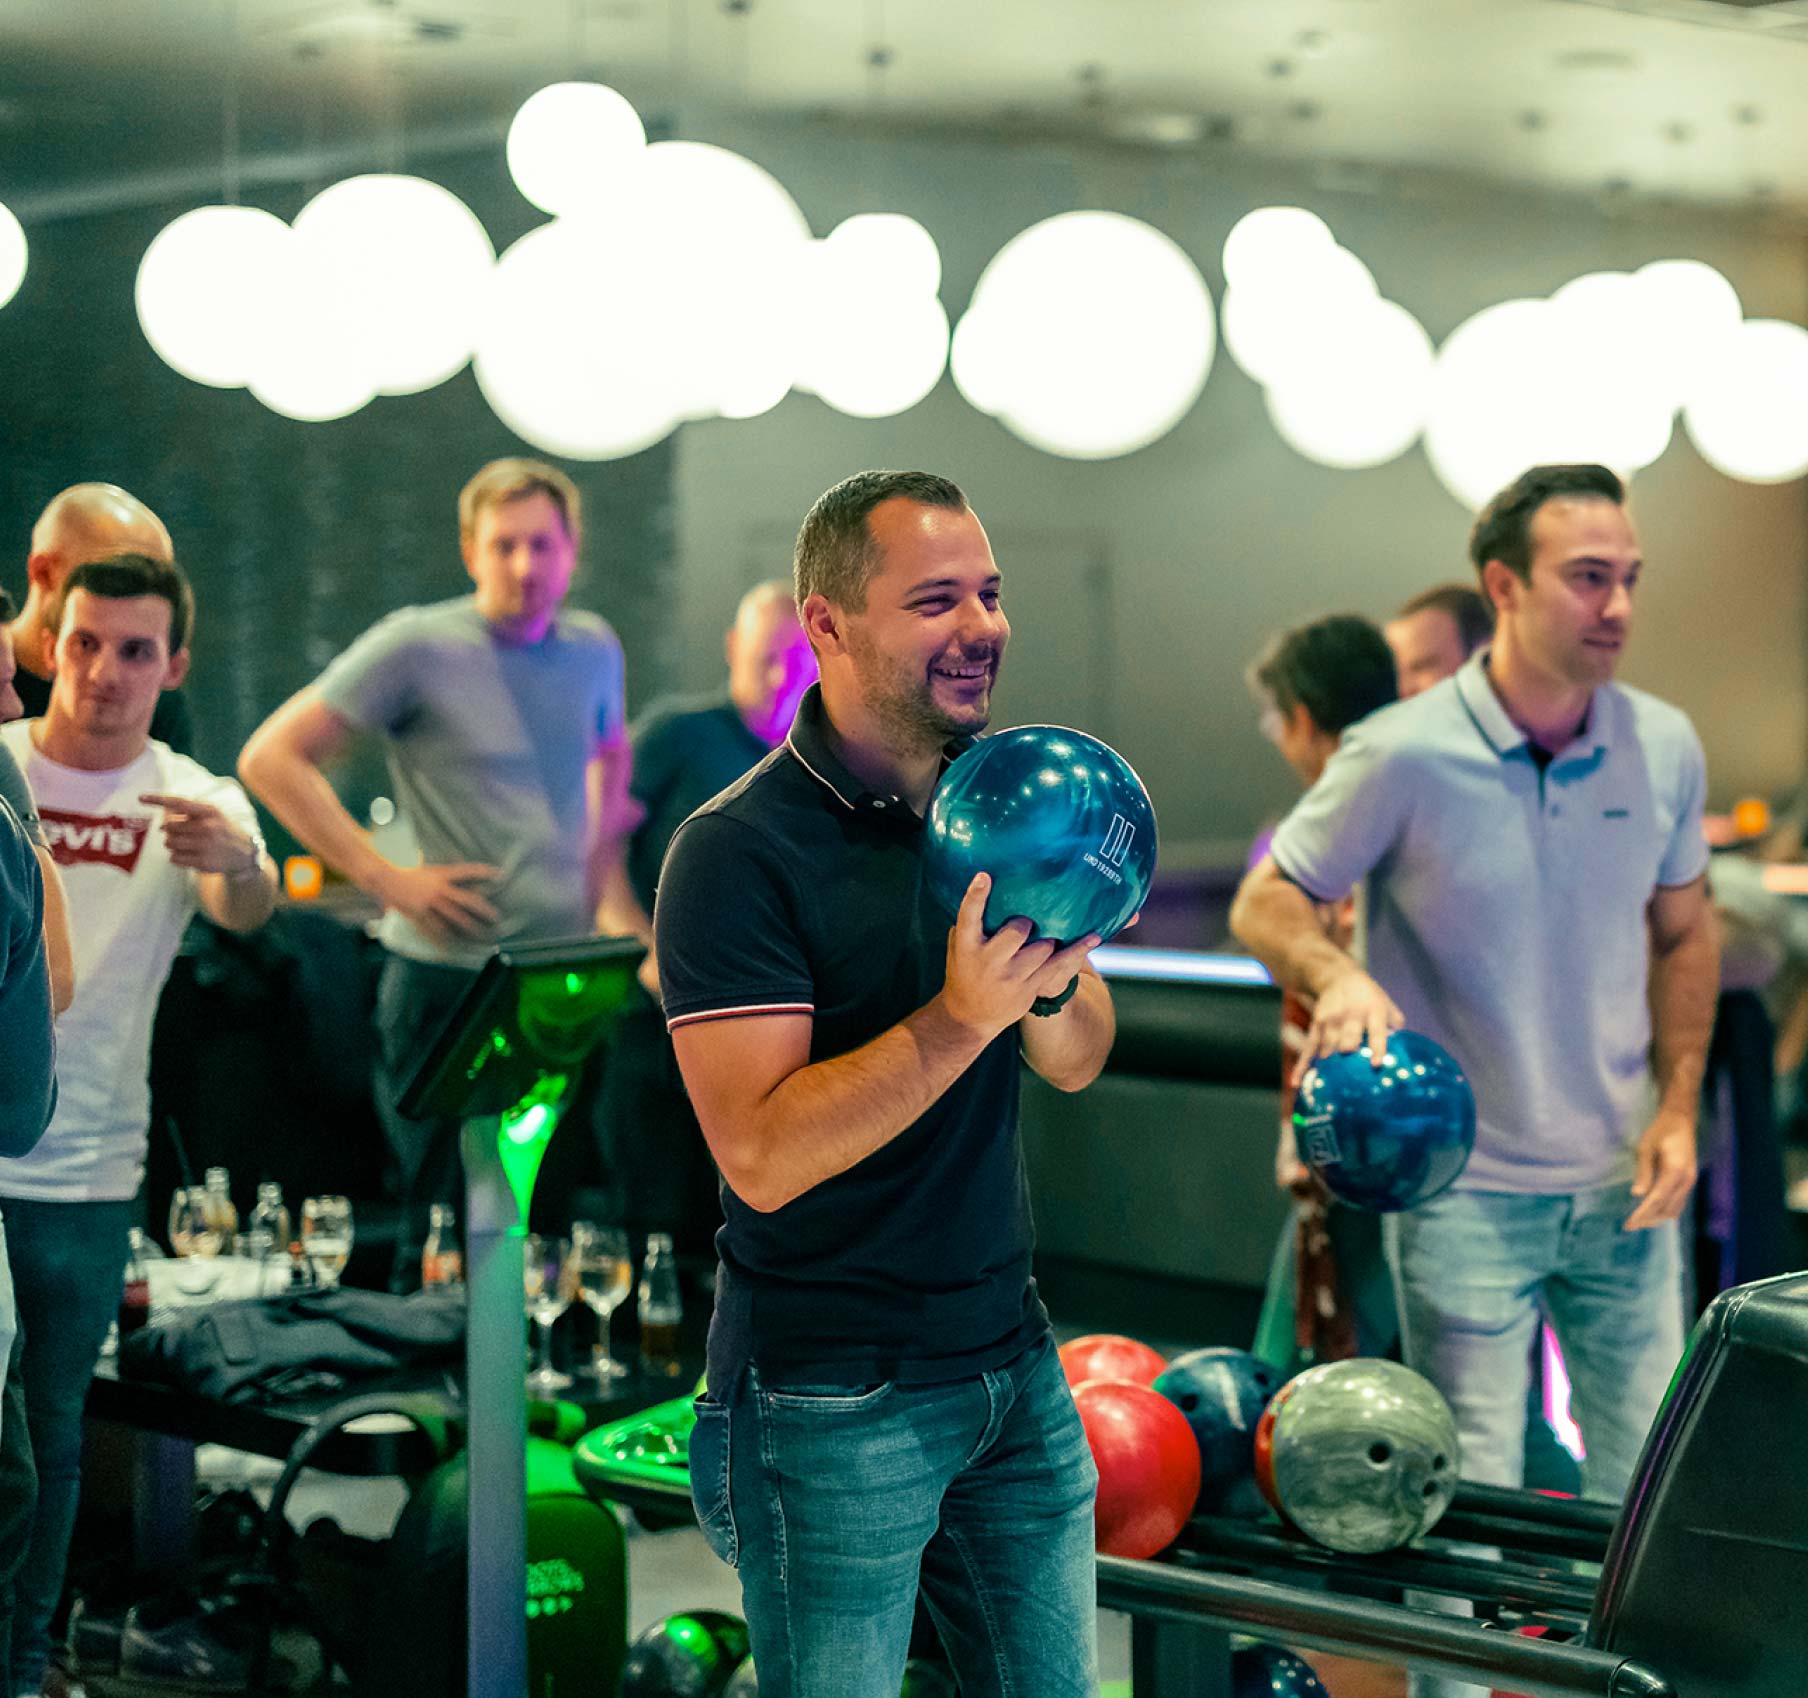 The Dots & Arrows team bowling at a quarterly team event